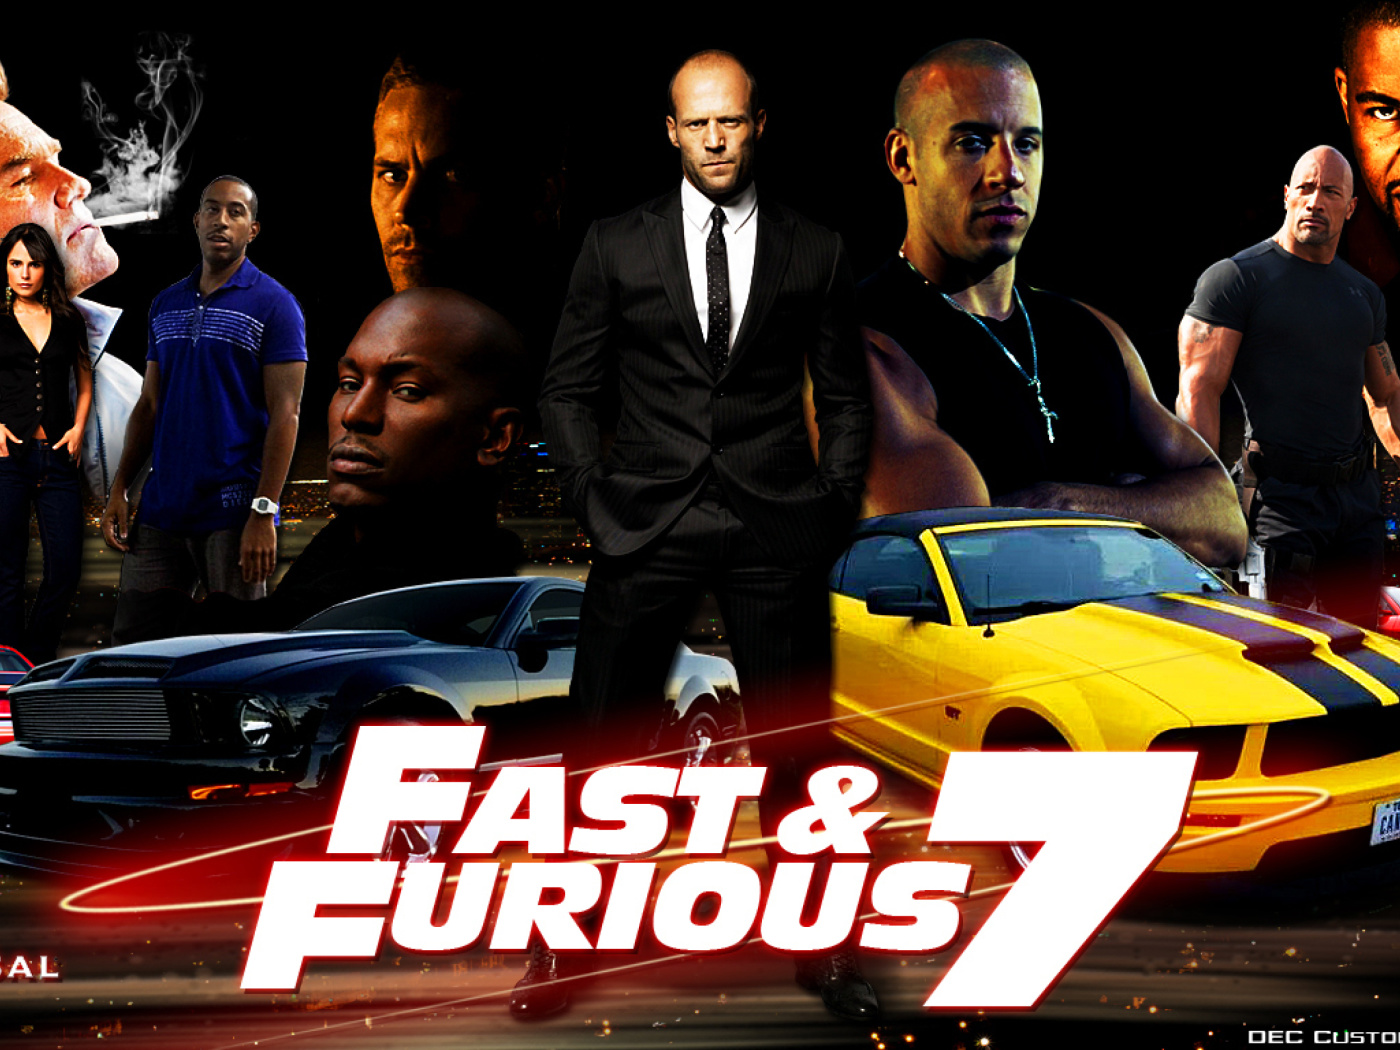 Fast and Furious 7 Movie Wallpapers for Fullscreen Desktop 1400x1050.